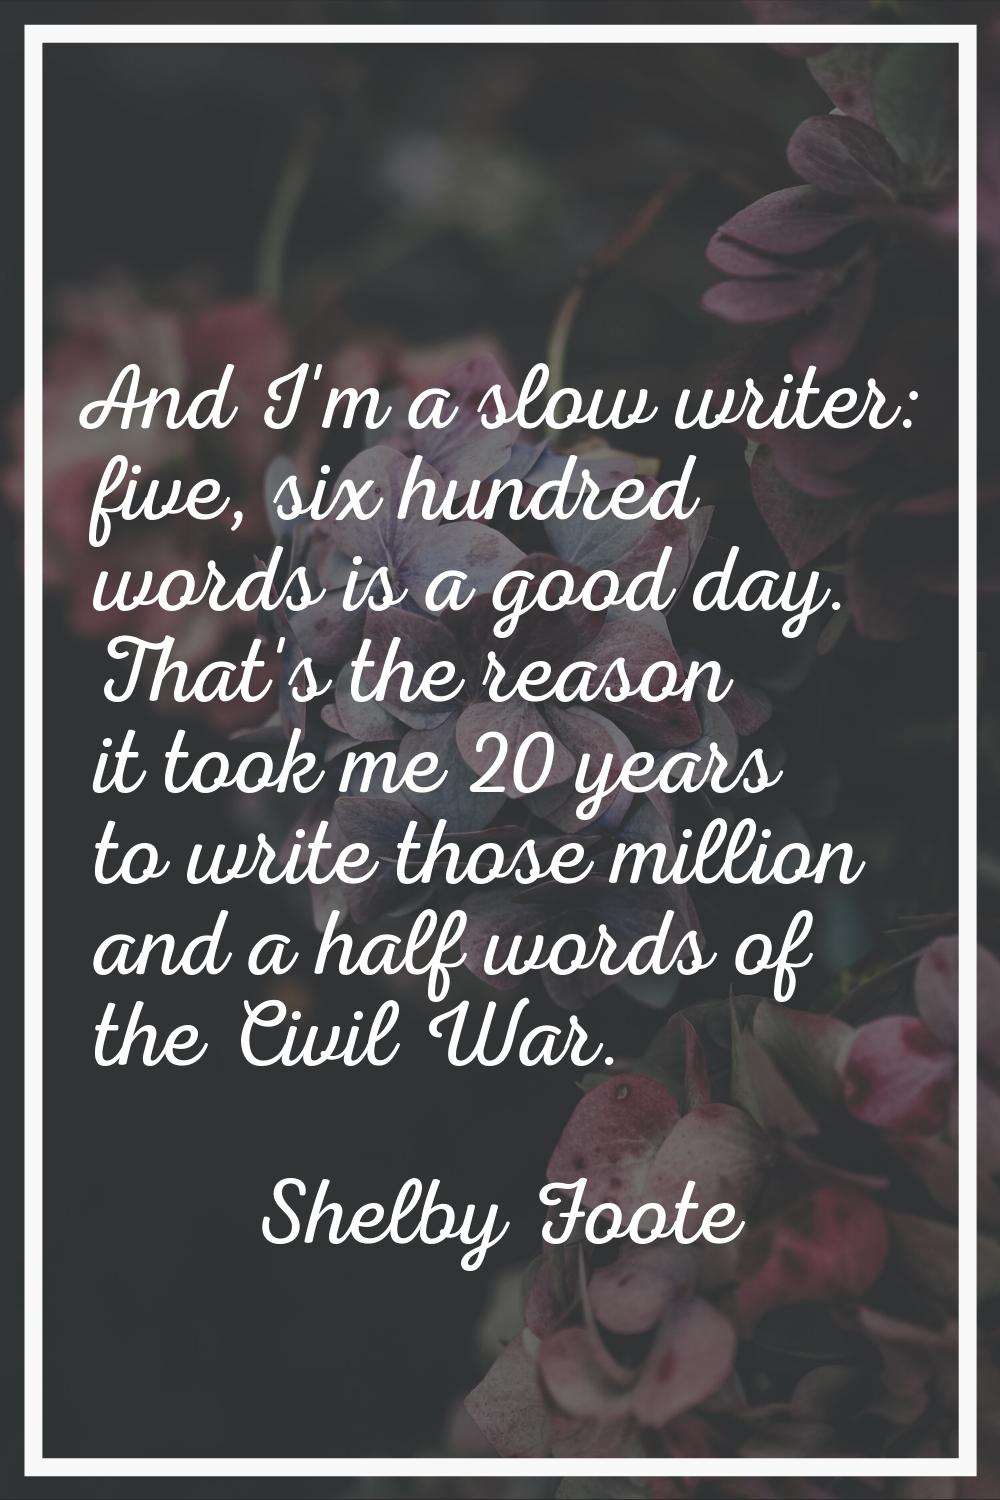 And I'm a slow writer: five, six hundred words is a good day. That's the reason it took me 20 years